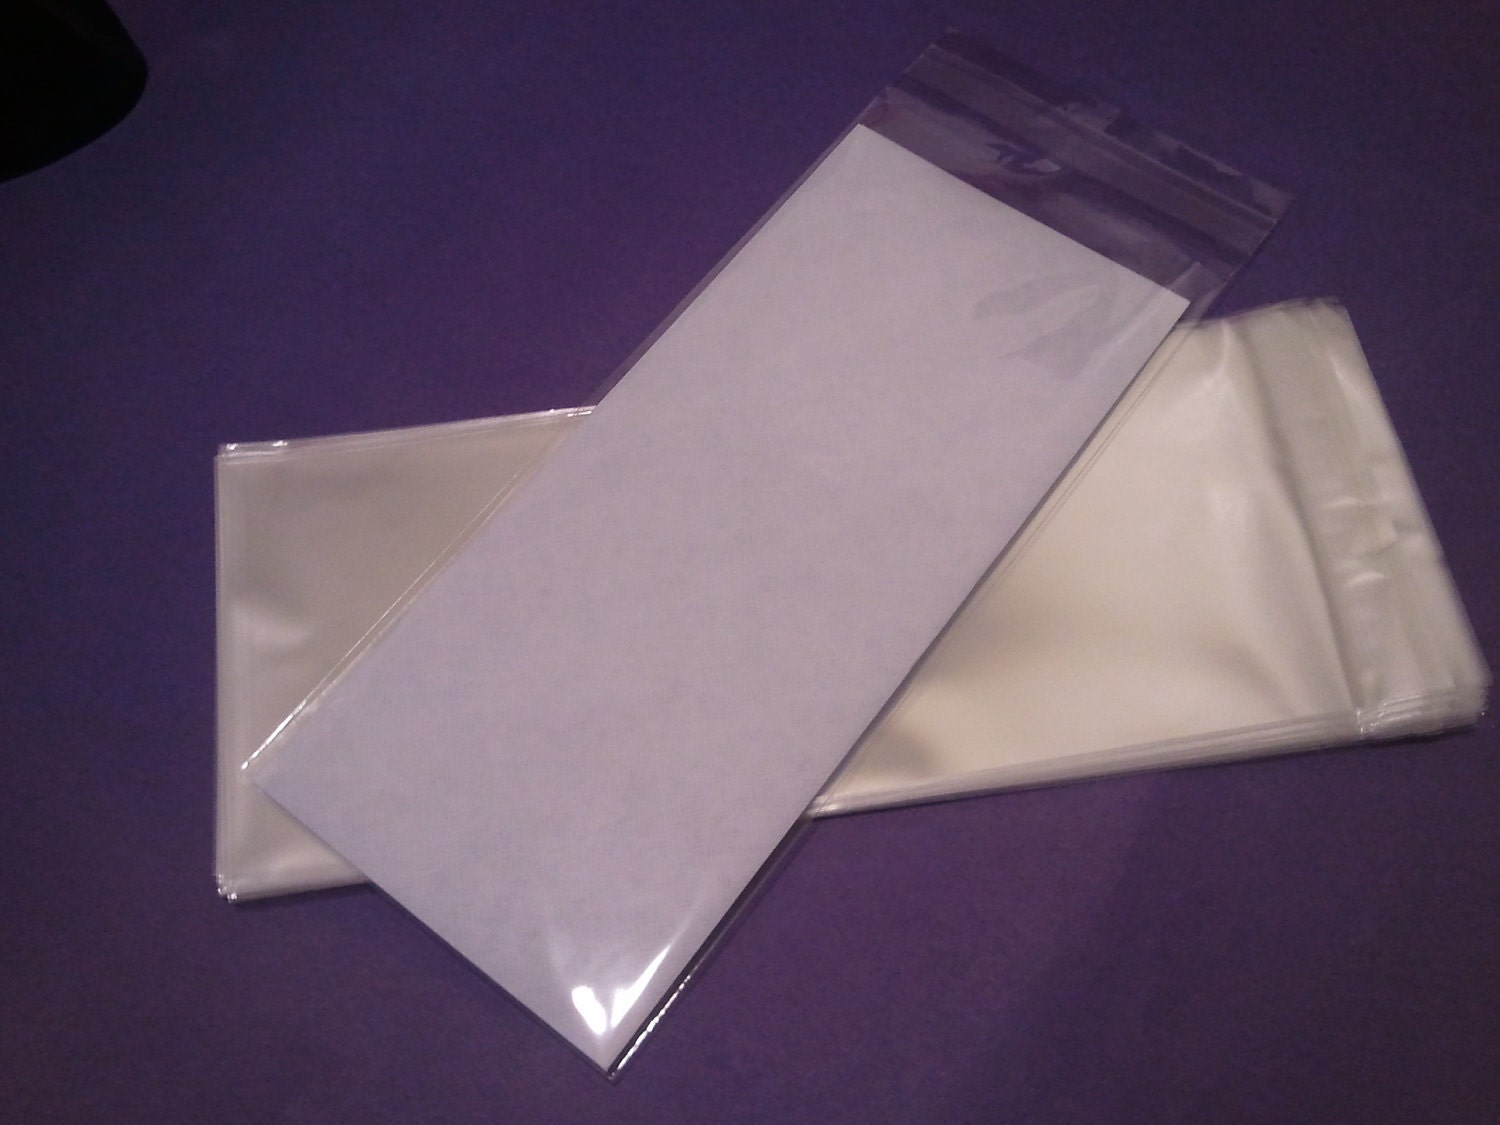 Resealable Bags 5x8 Inches Resealable Jewelry Bags - RB-58 - Qty 50